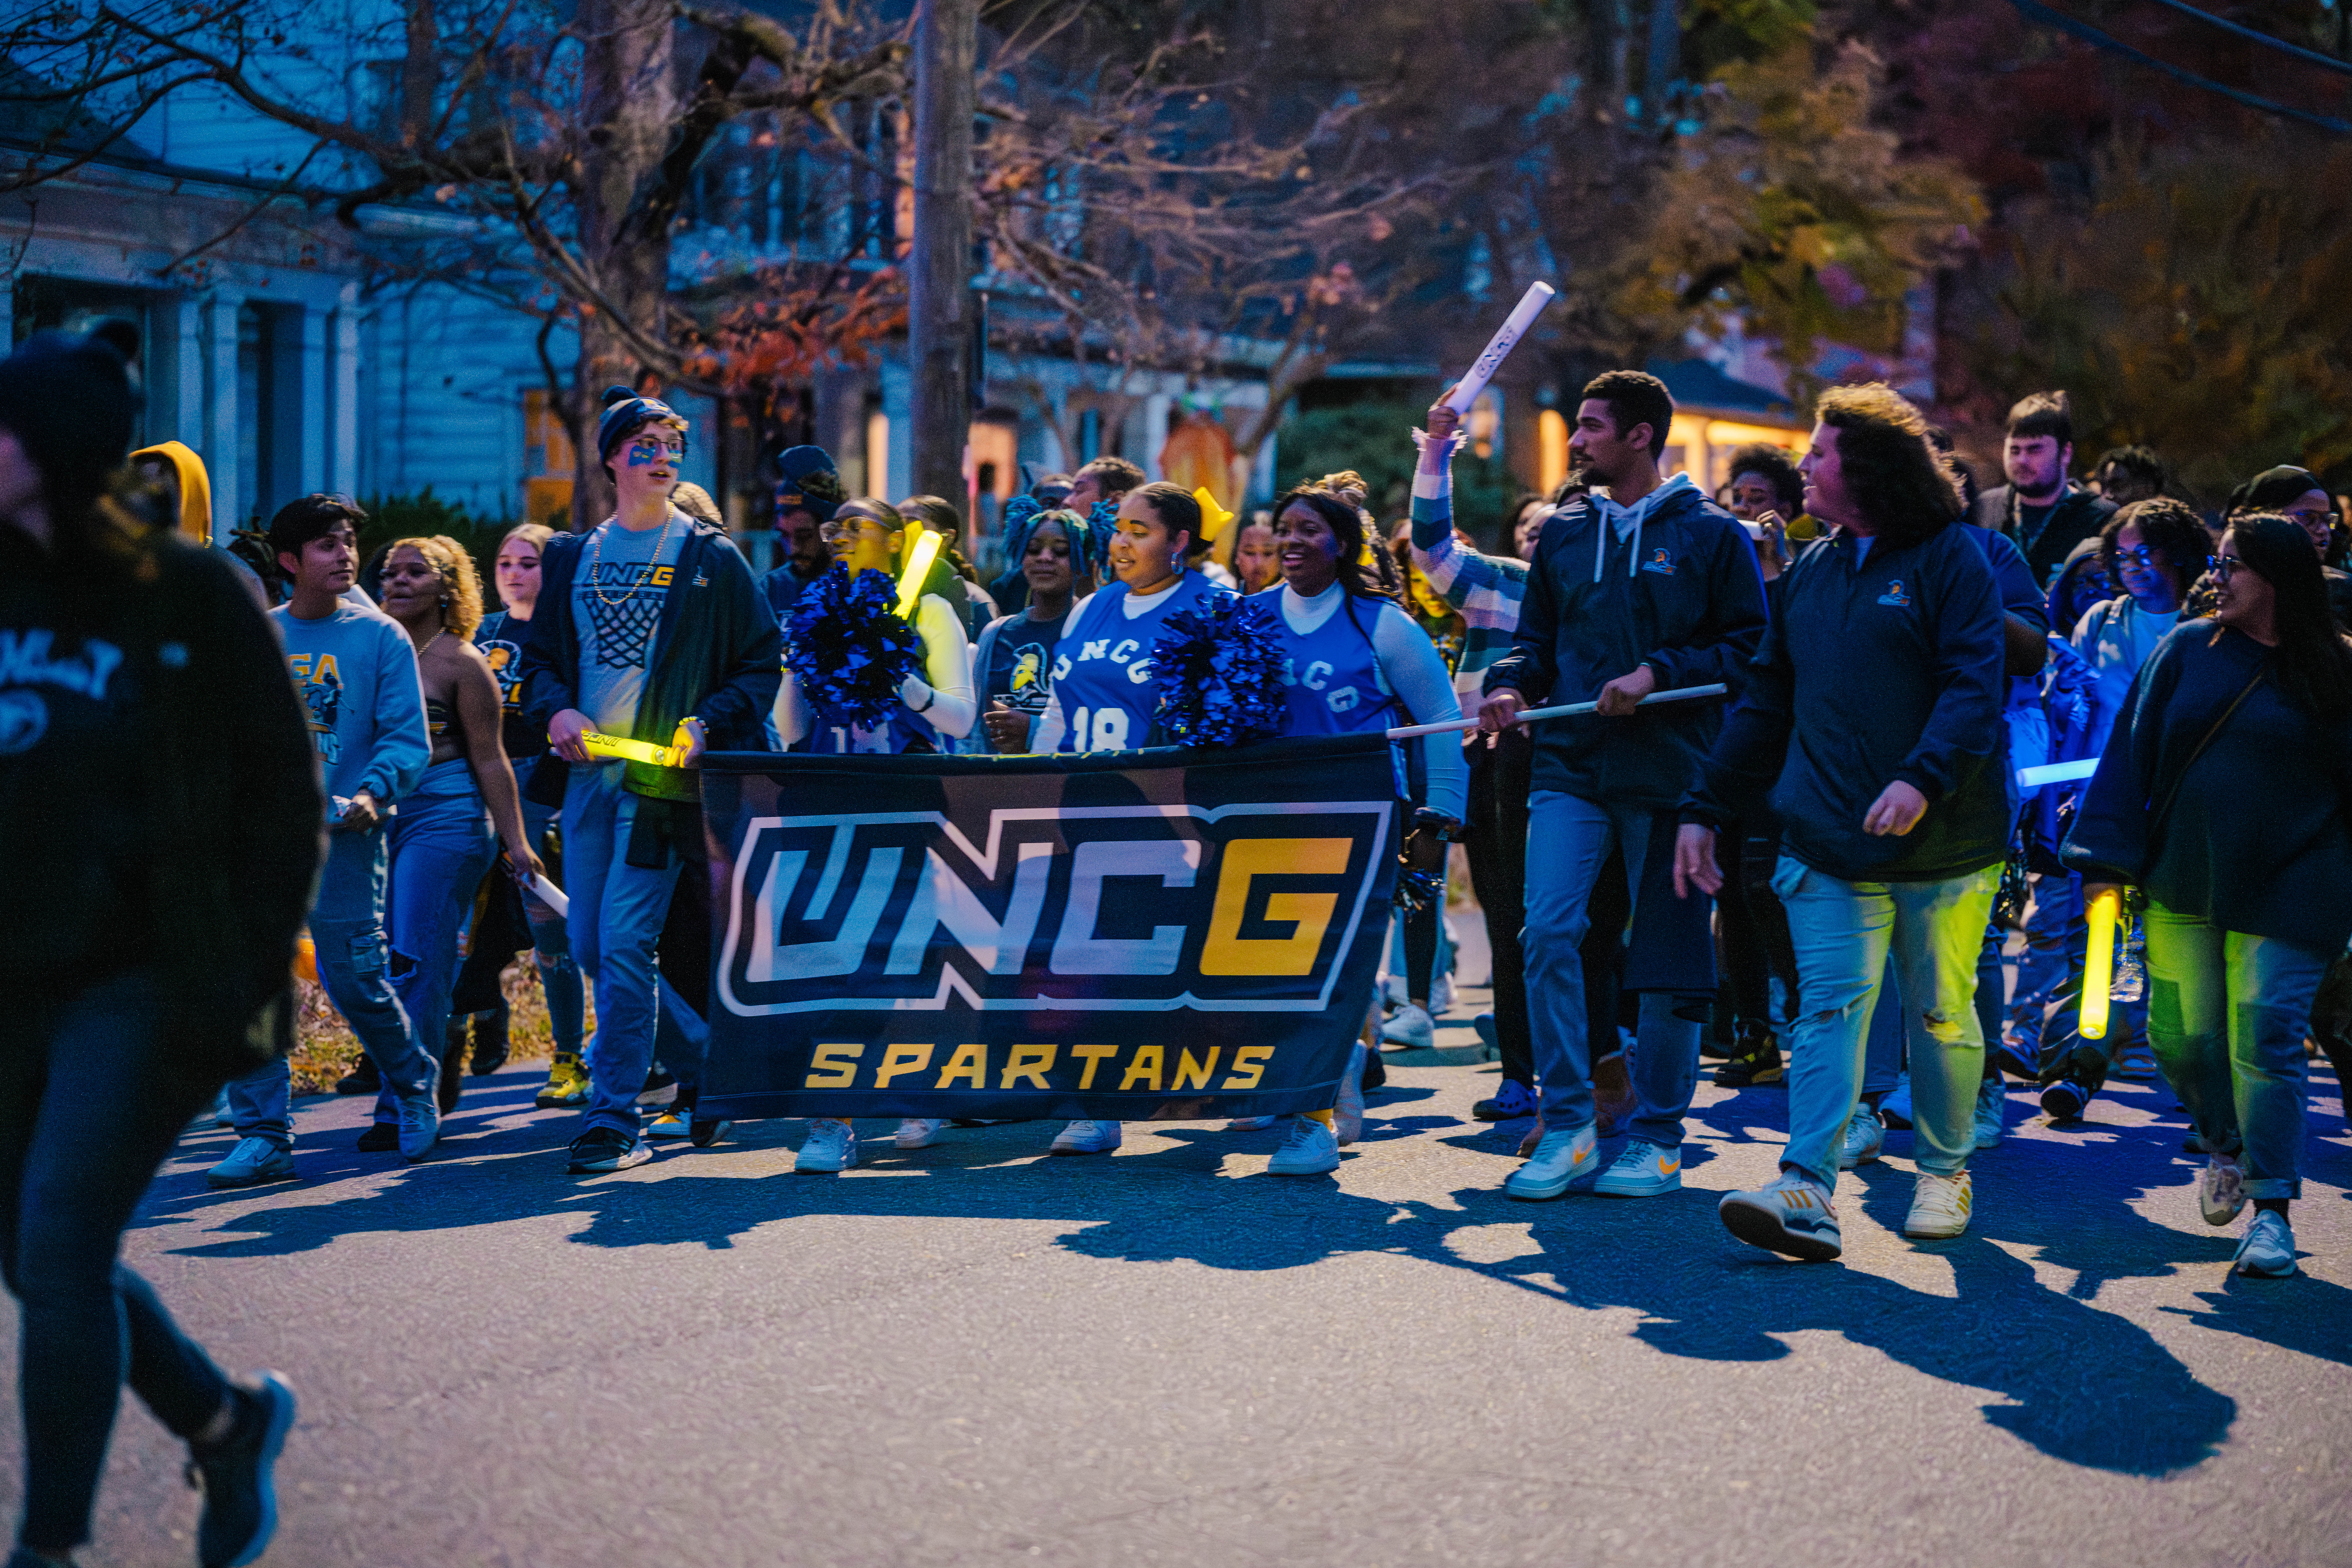 Students march down a street at dusk holding a UNCG banner and cheering.